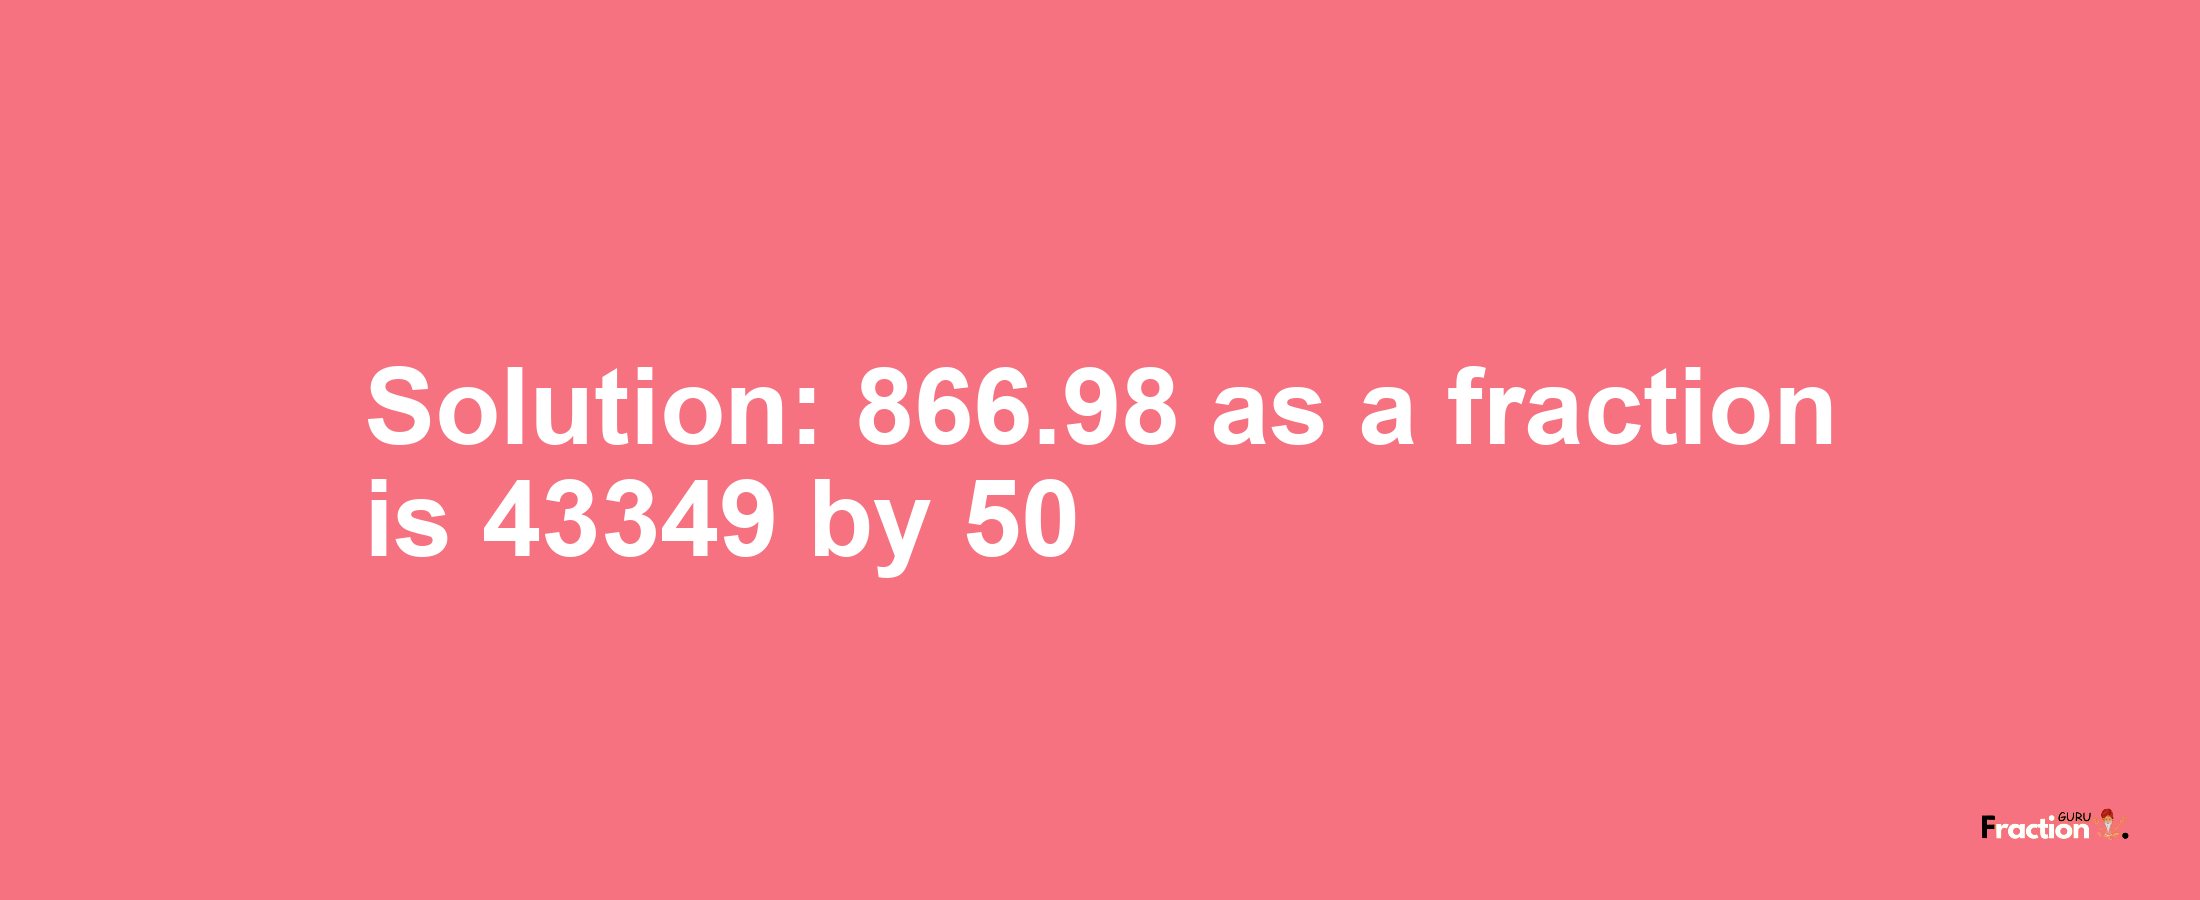 Solution:866.98 as a fraction is 43349/50